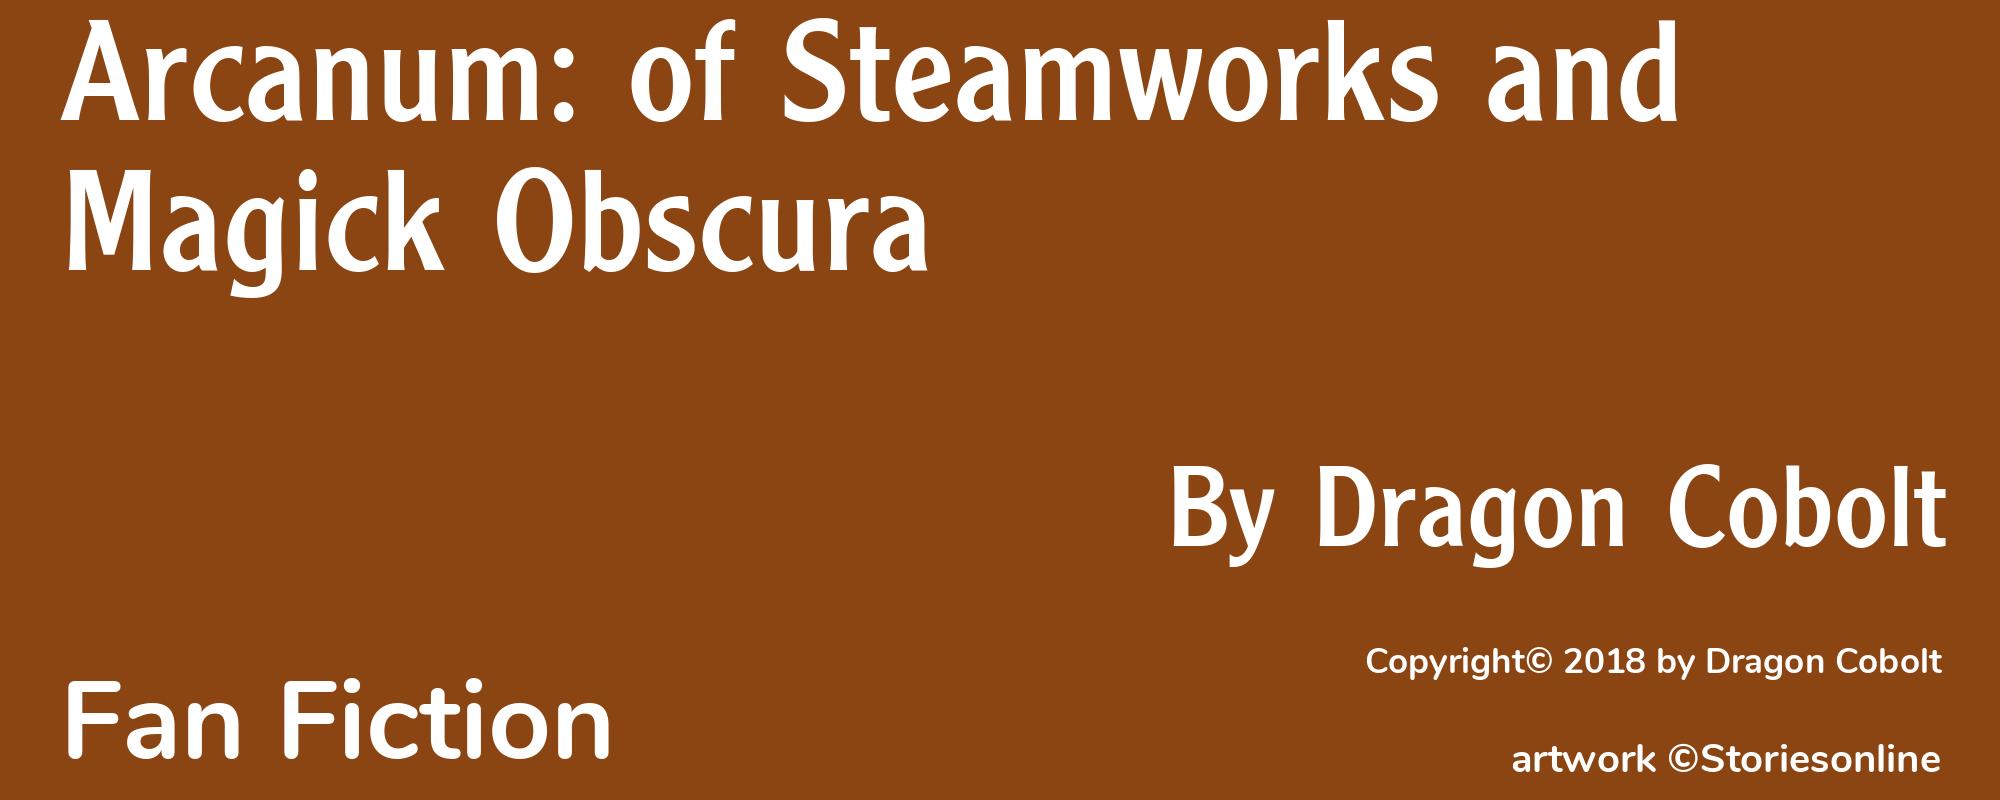 Arcanum: of Steamworks and Magick Obscura - Cover